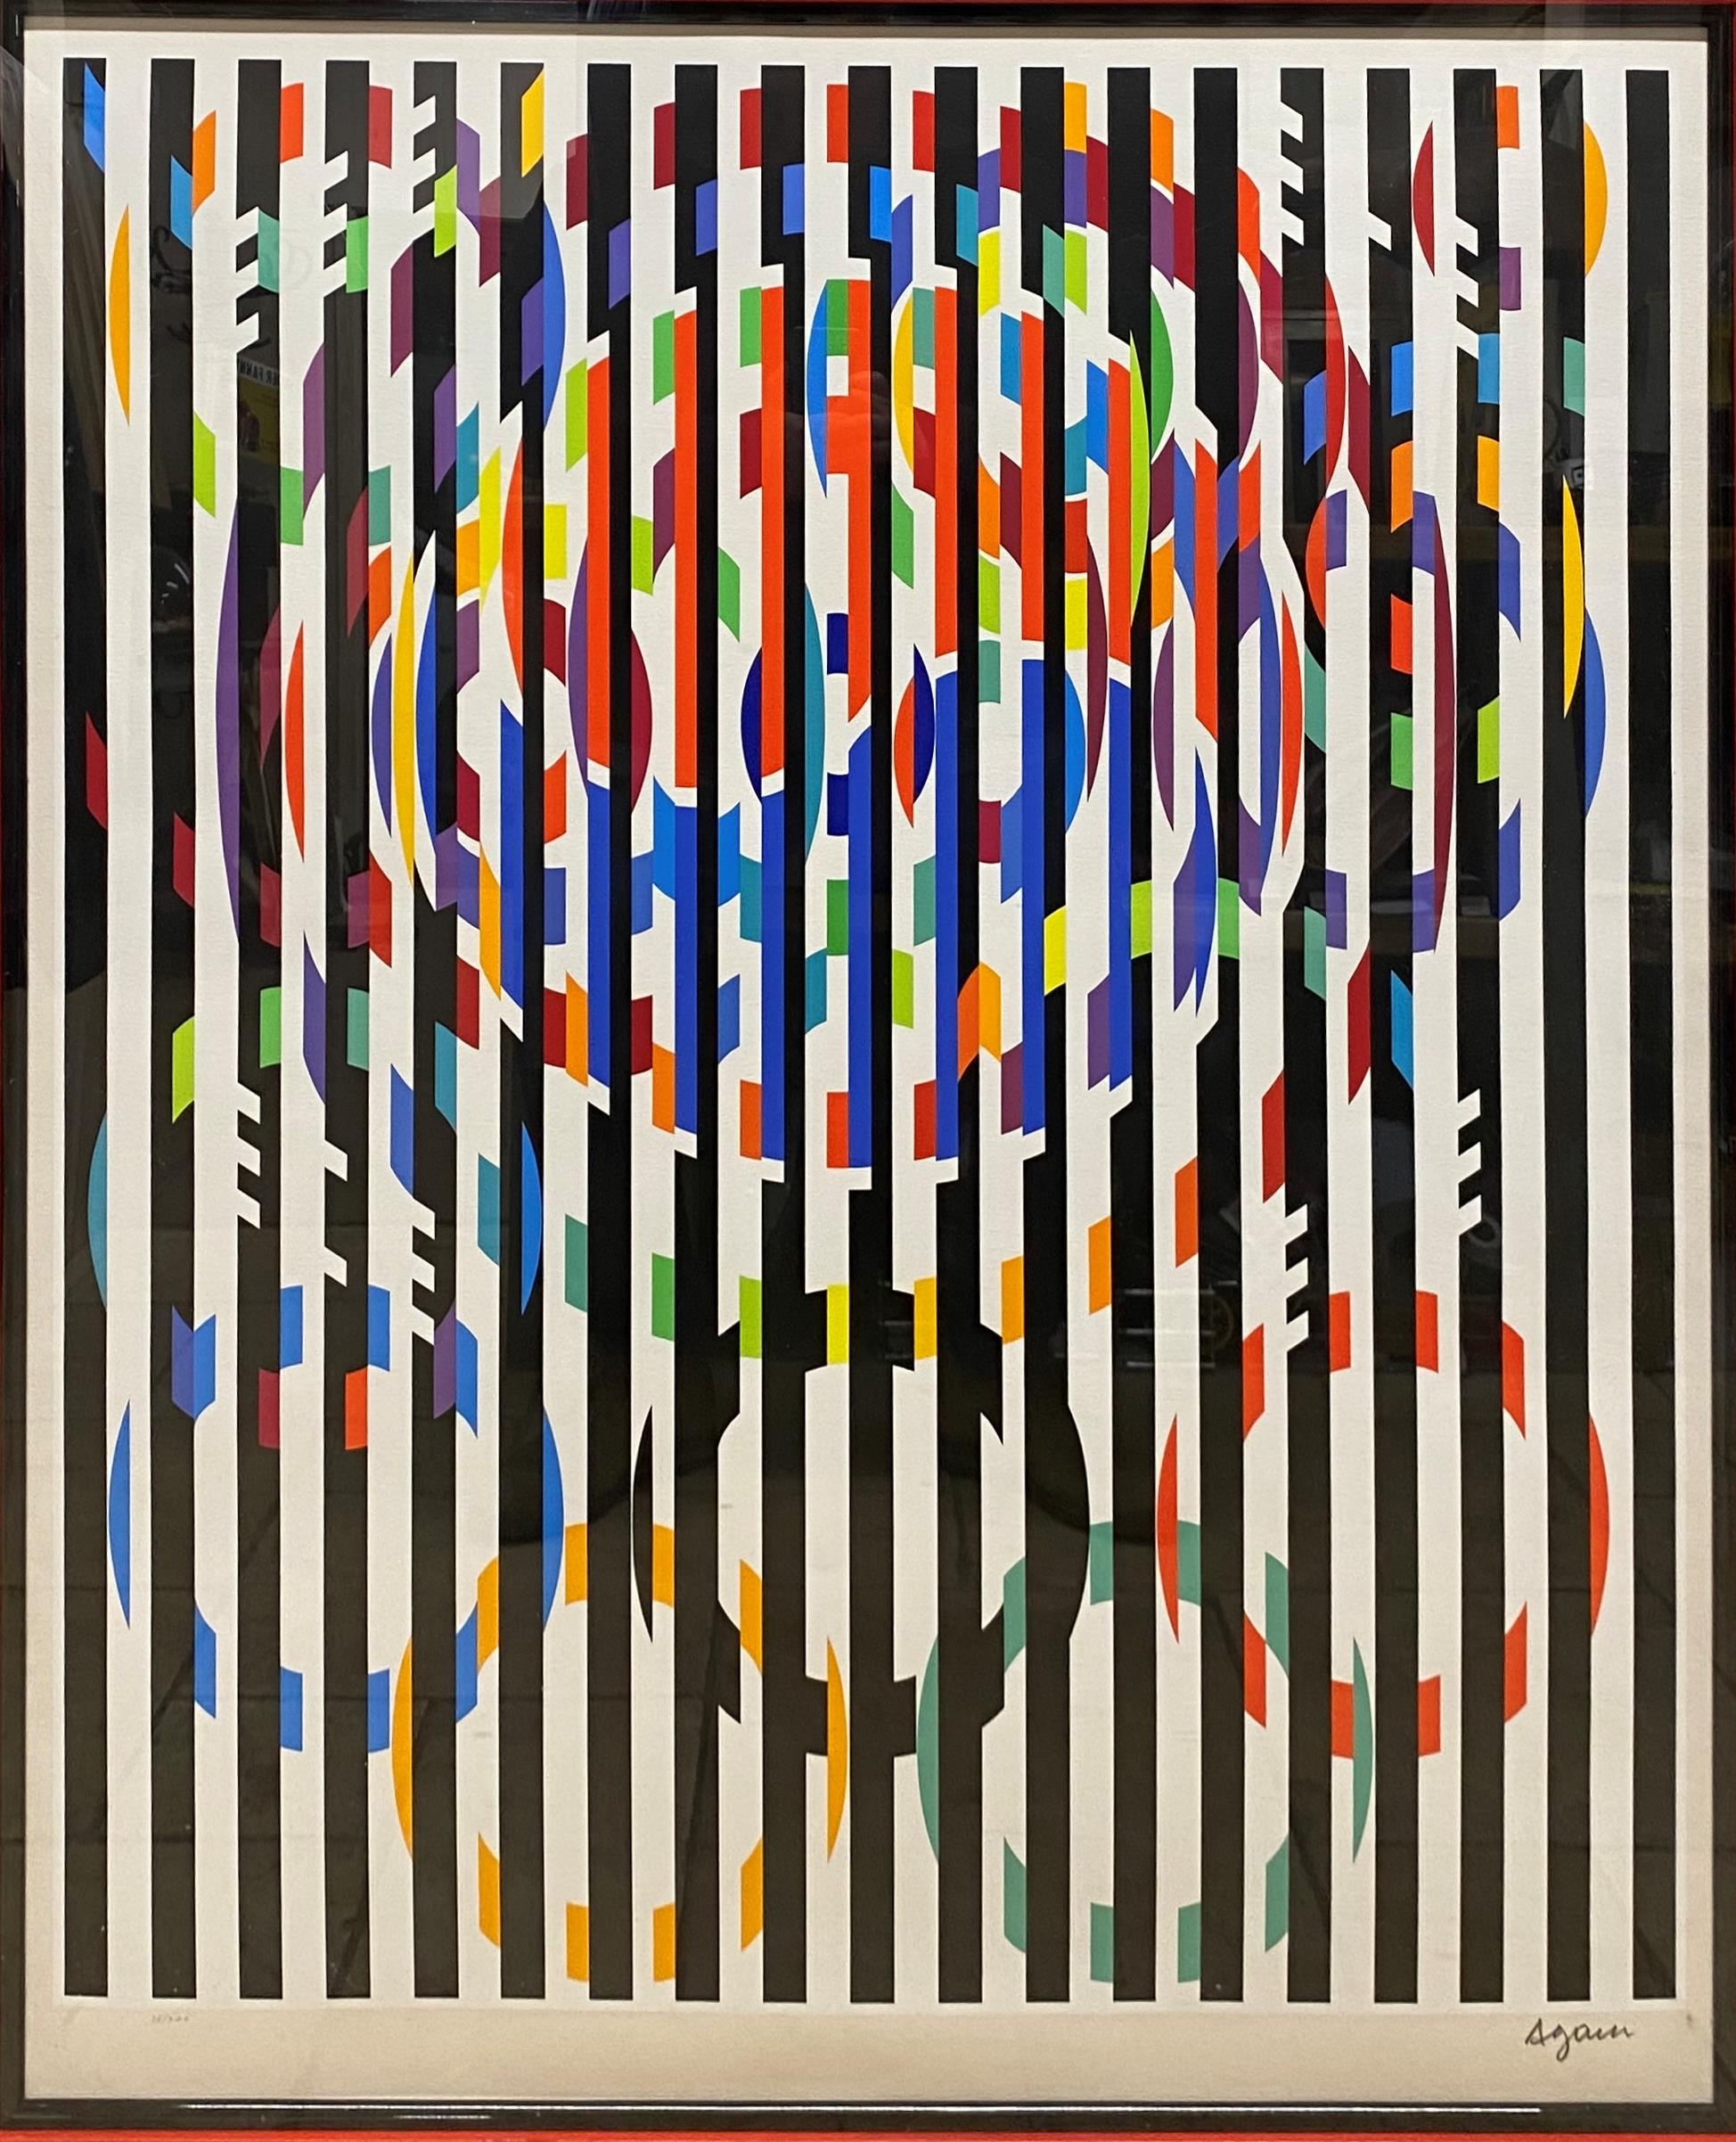 Yaacov Agam (Israeli /French, 1928) - 'Message of Peace', from Official Arts Portfolio of the 1988